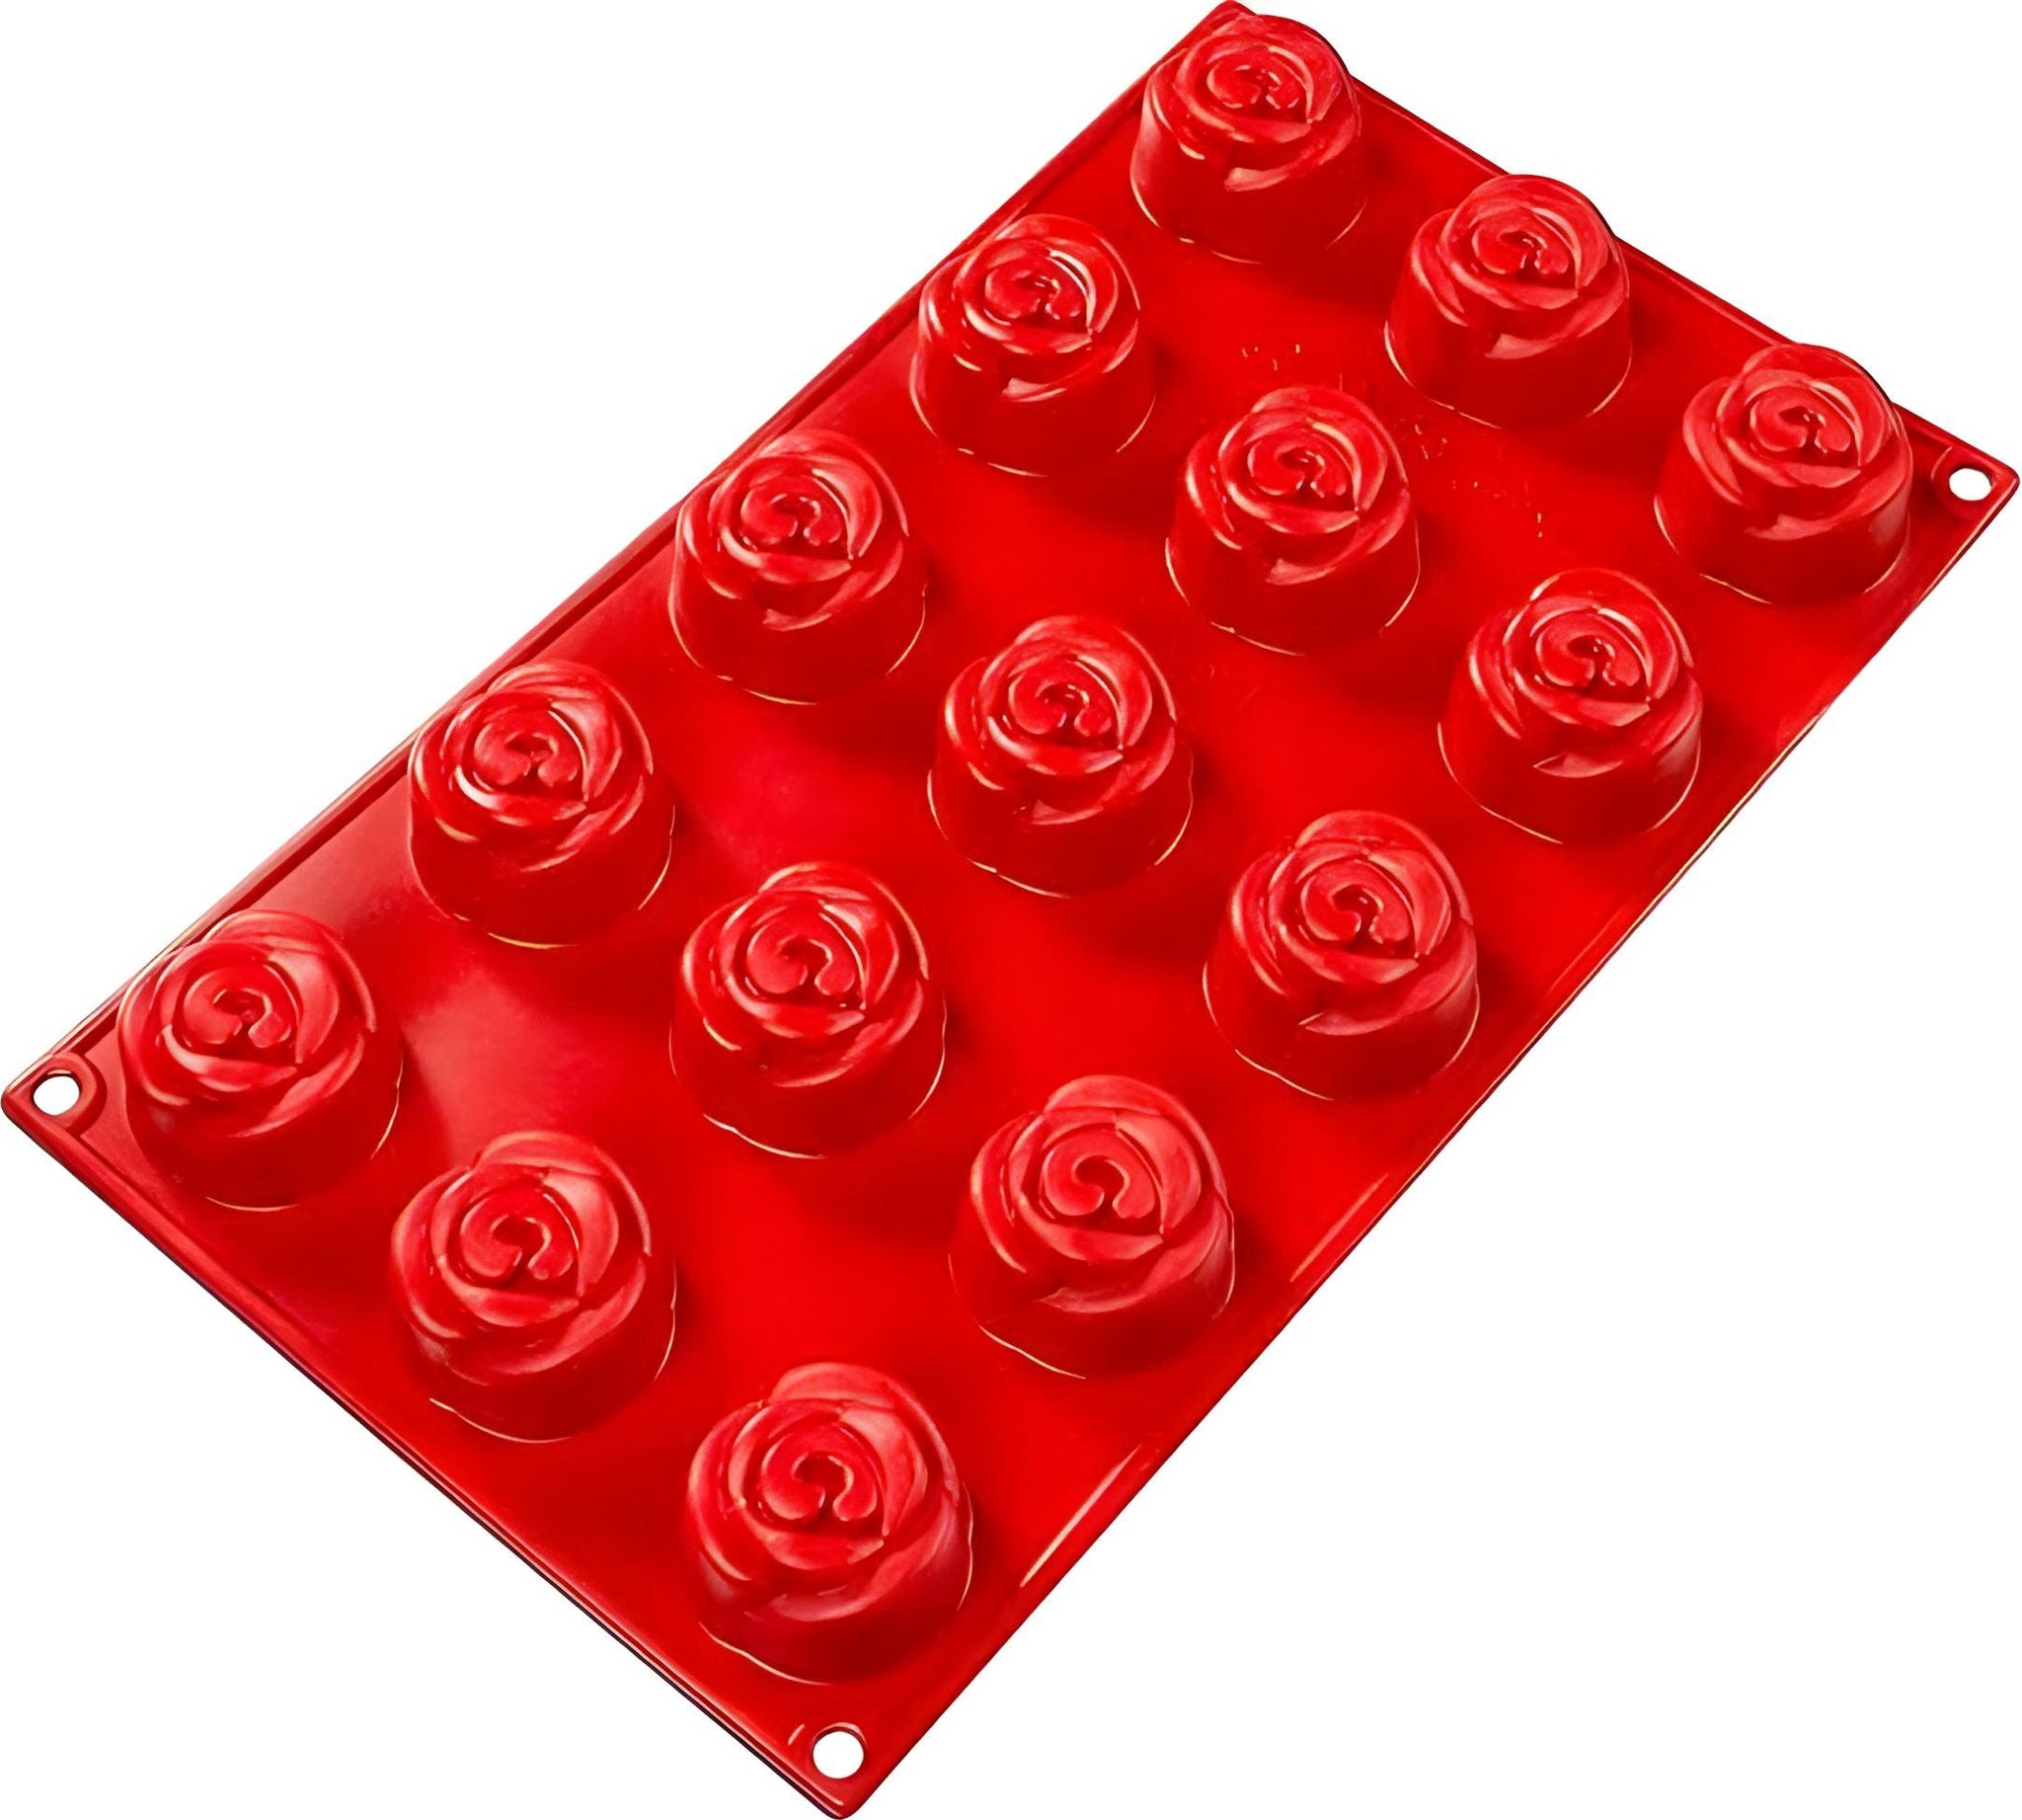 Fat Daddio's - 1.73" x 1.06" Silicone 15 Cavities Baking Rose Mold - SMF-074